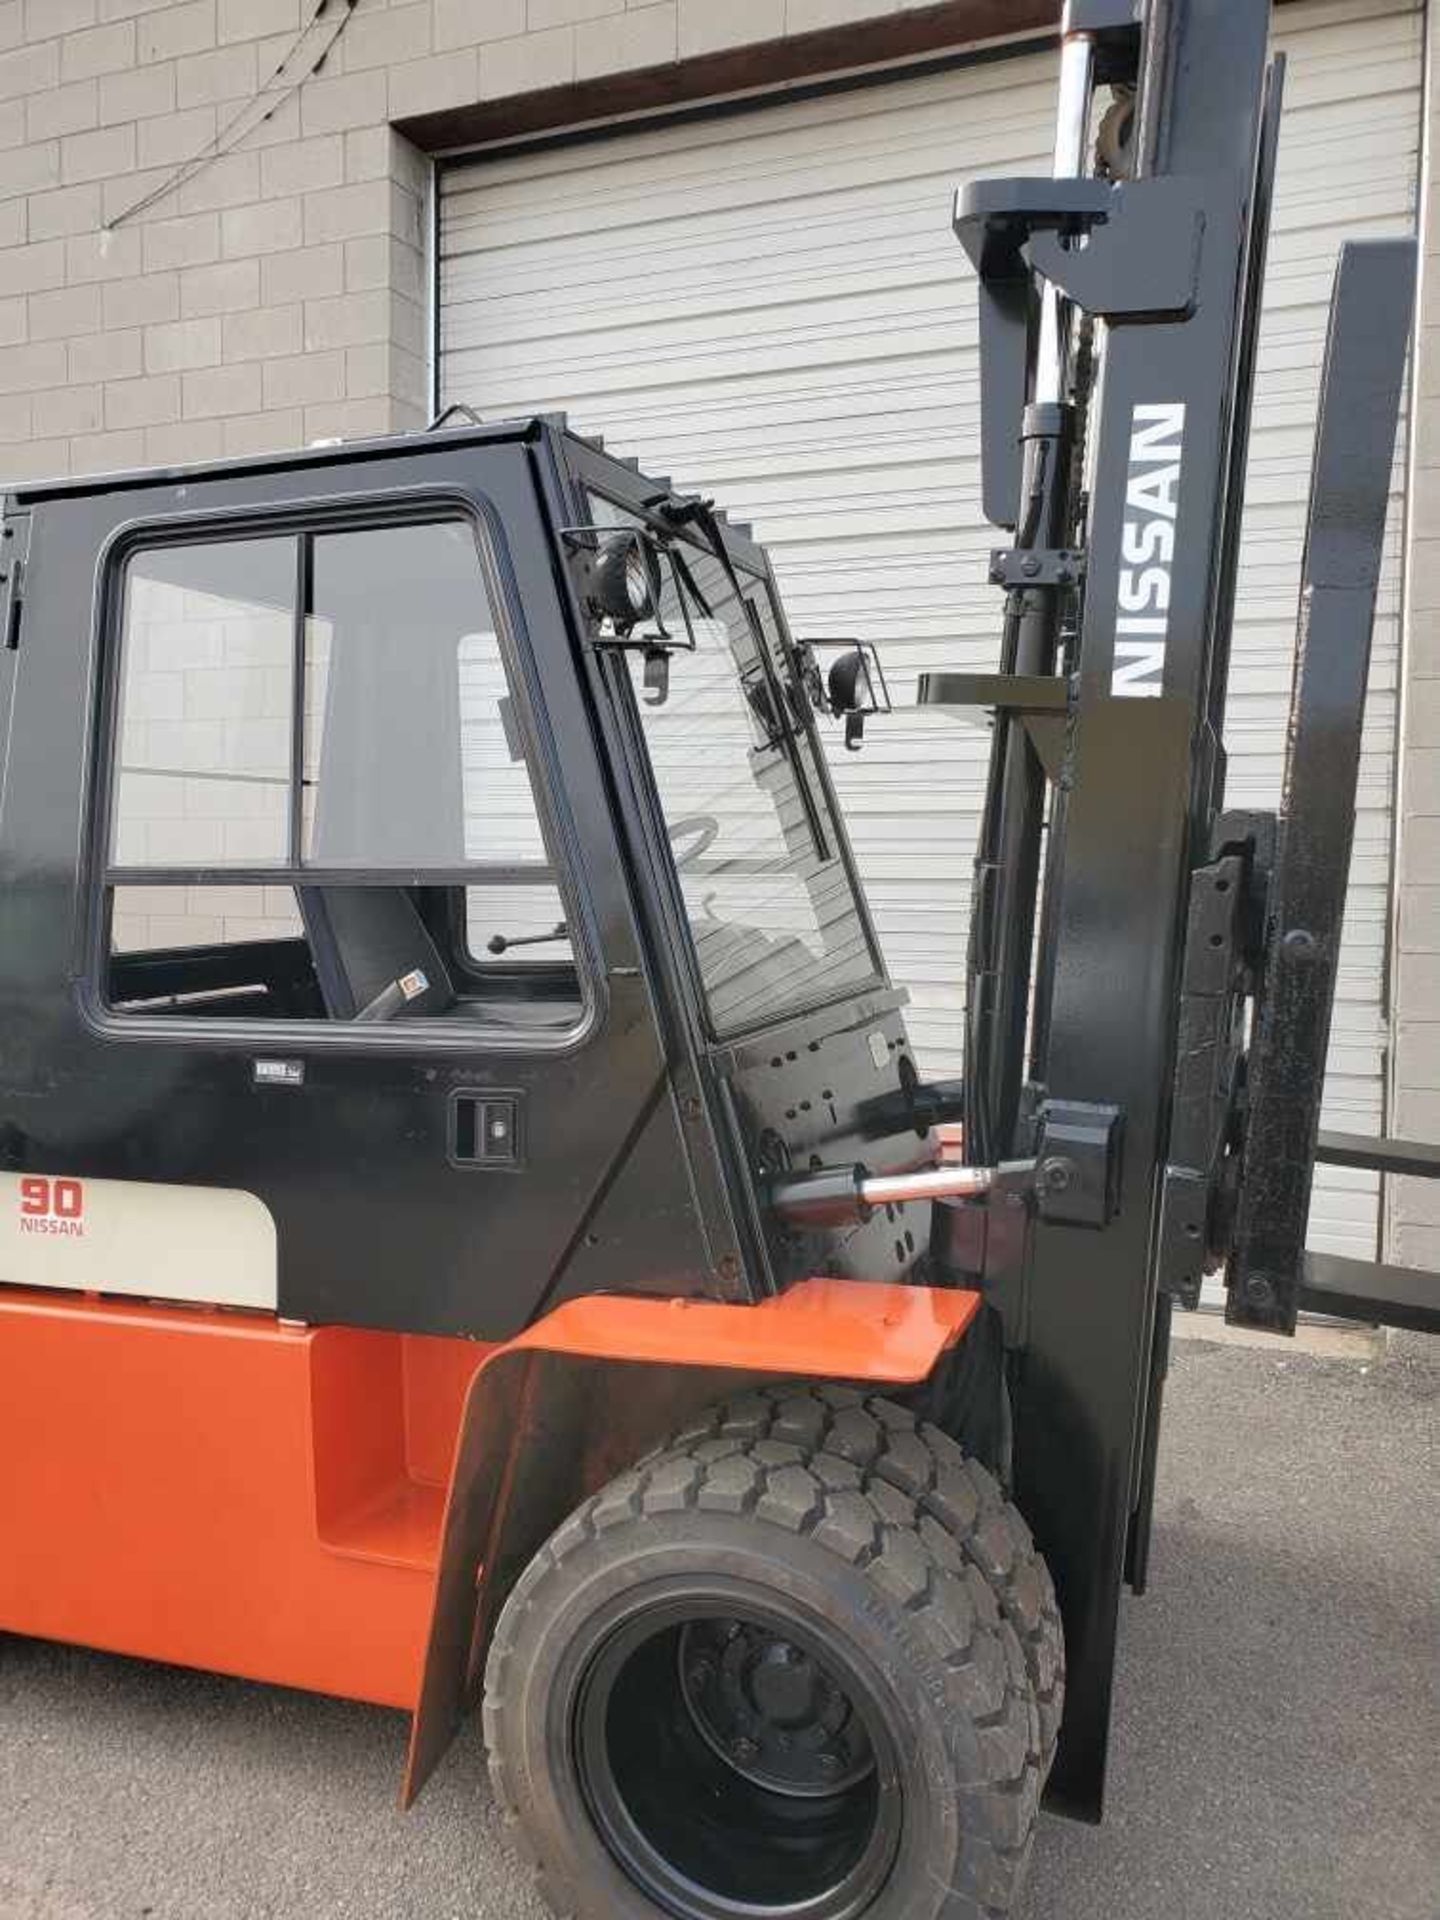 FREE CUSTOMS - Nissan 9000lbs Capacity OUTDOOR Forklift - LPG (propane) with sideshift and cab - Image 3 of 3